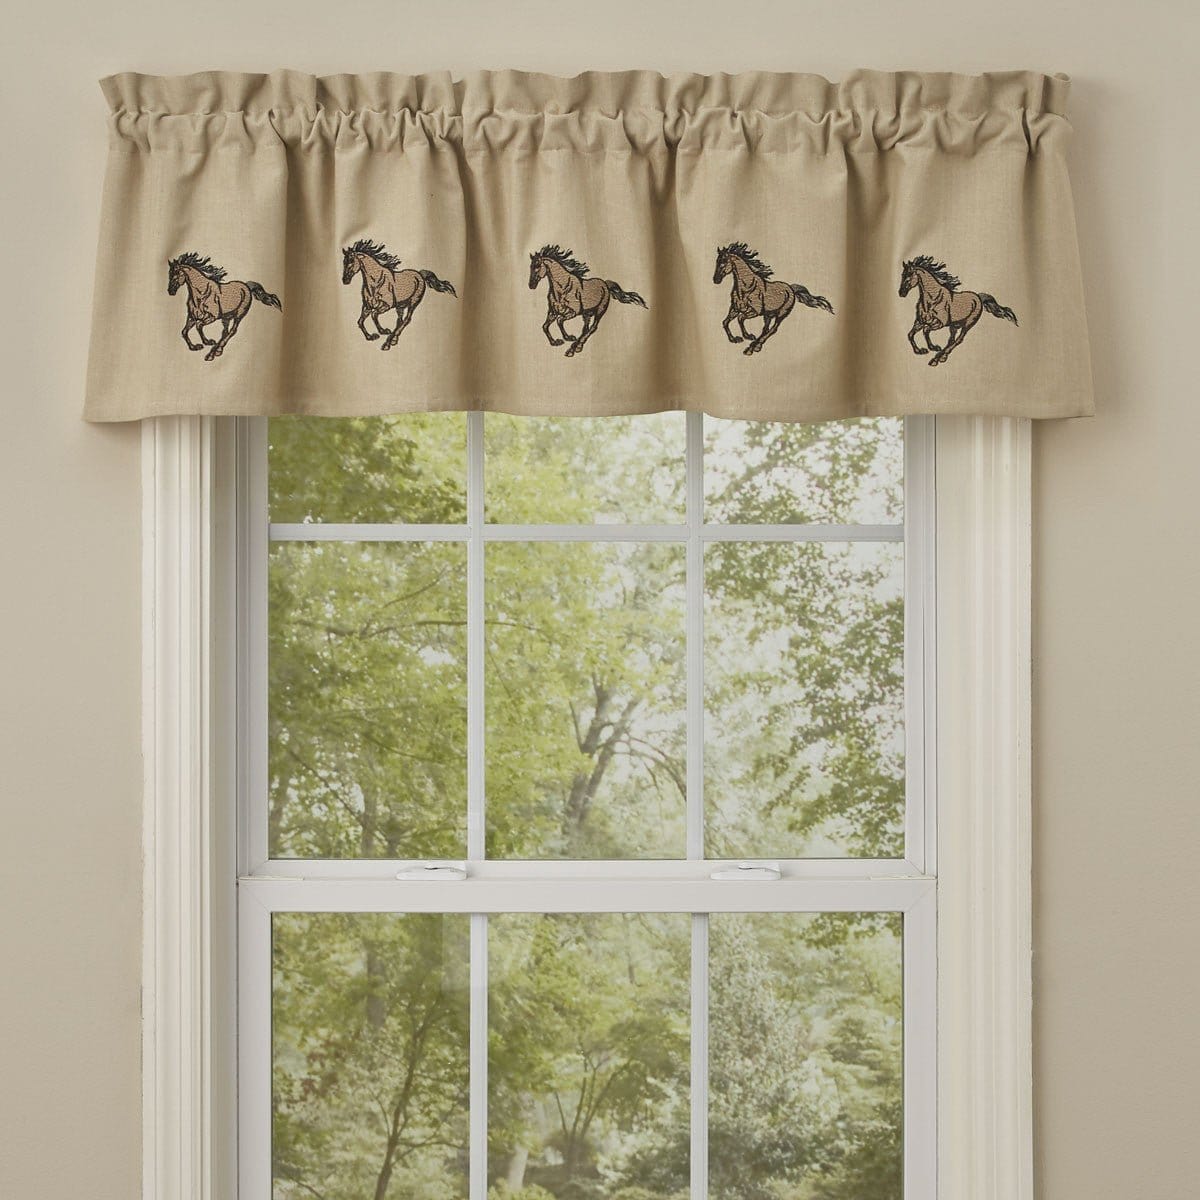 Embroidered Horse Valance 14" High Lined-Park Designs-The Village Merchant